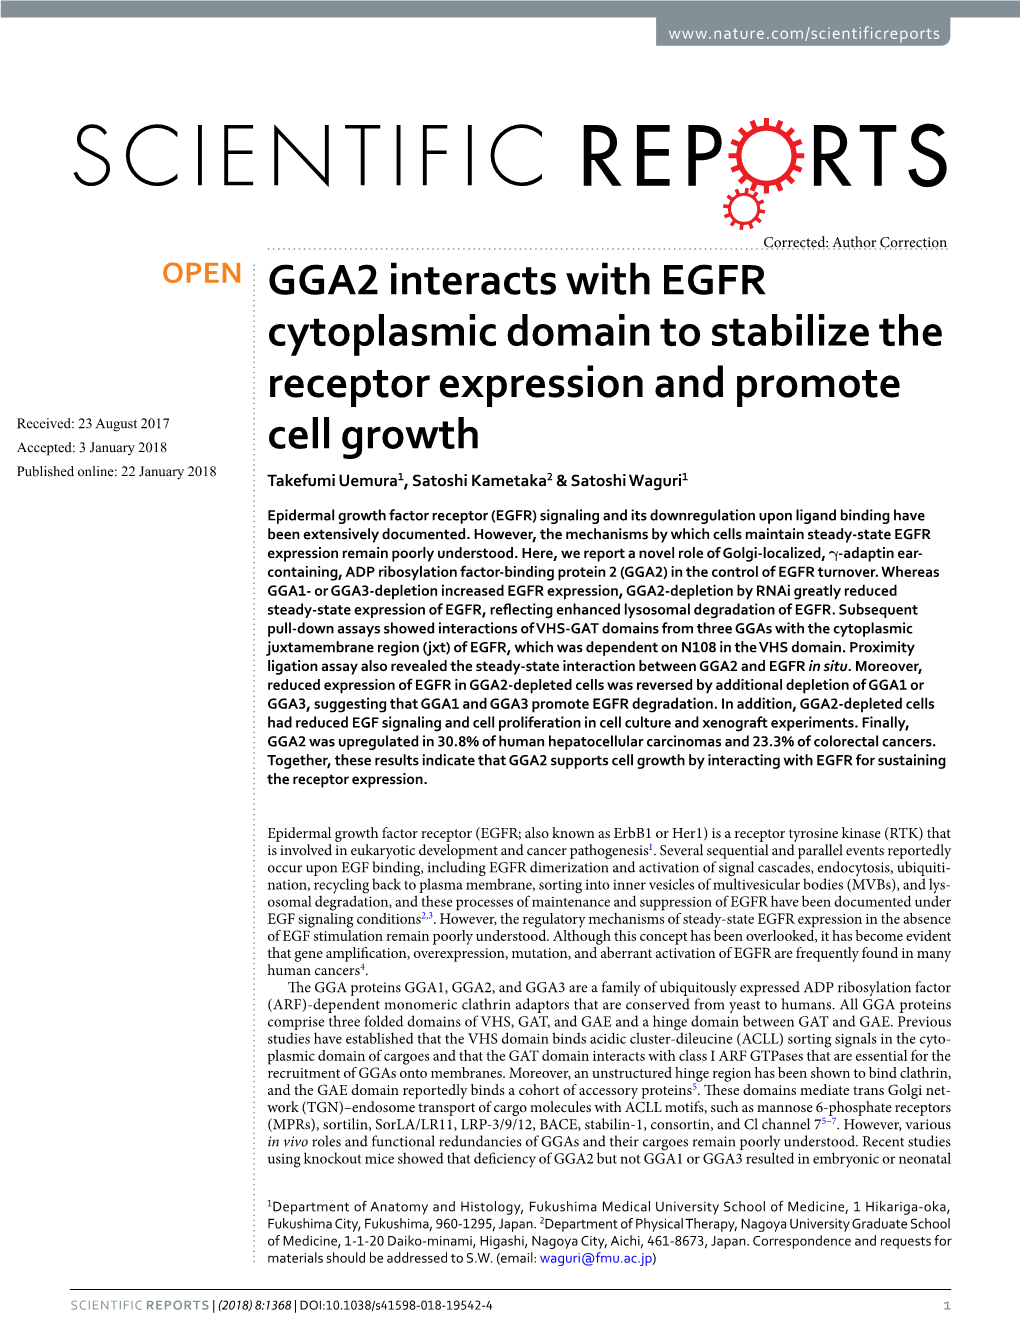 GGA2 Interacts with EGFR Cytoplasmic Domain to Stabilize The